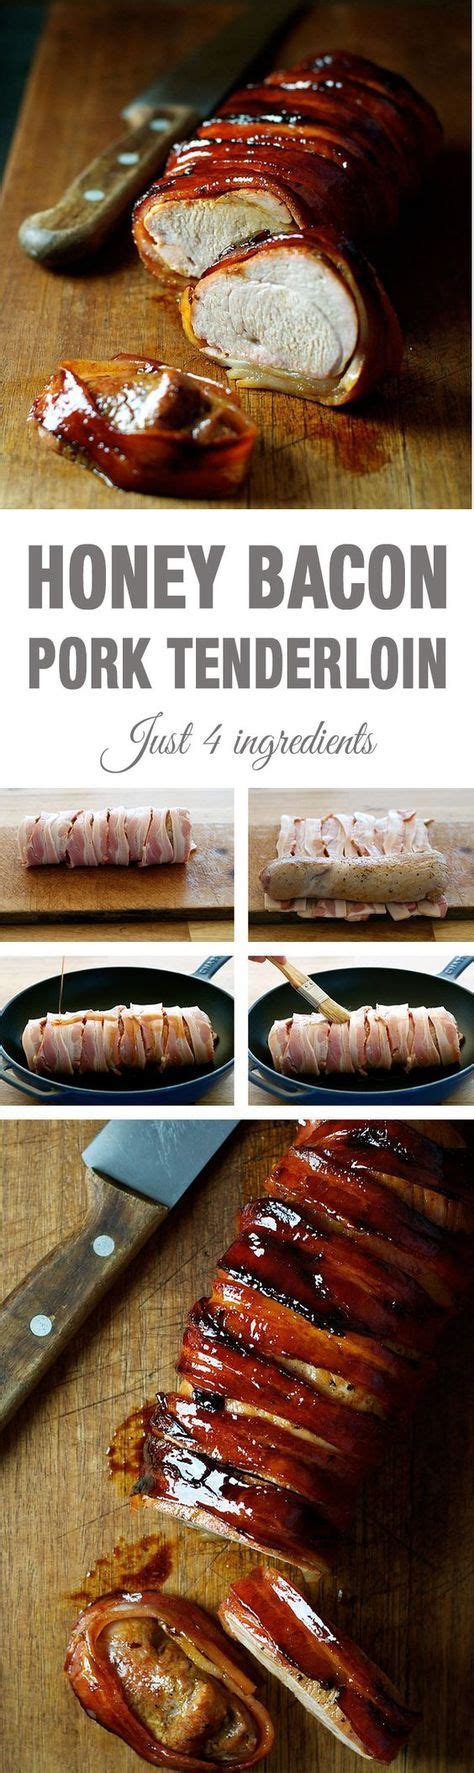 Rub the top each tenderloin with 1/2 of the roasted garlic and season with salt and pepper. Bacon Wrapped Pork Tenderloin | Recipe | Food recipes ...